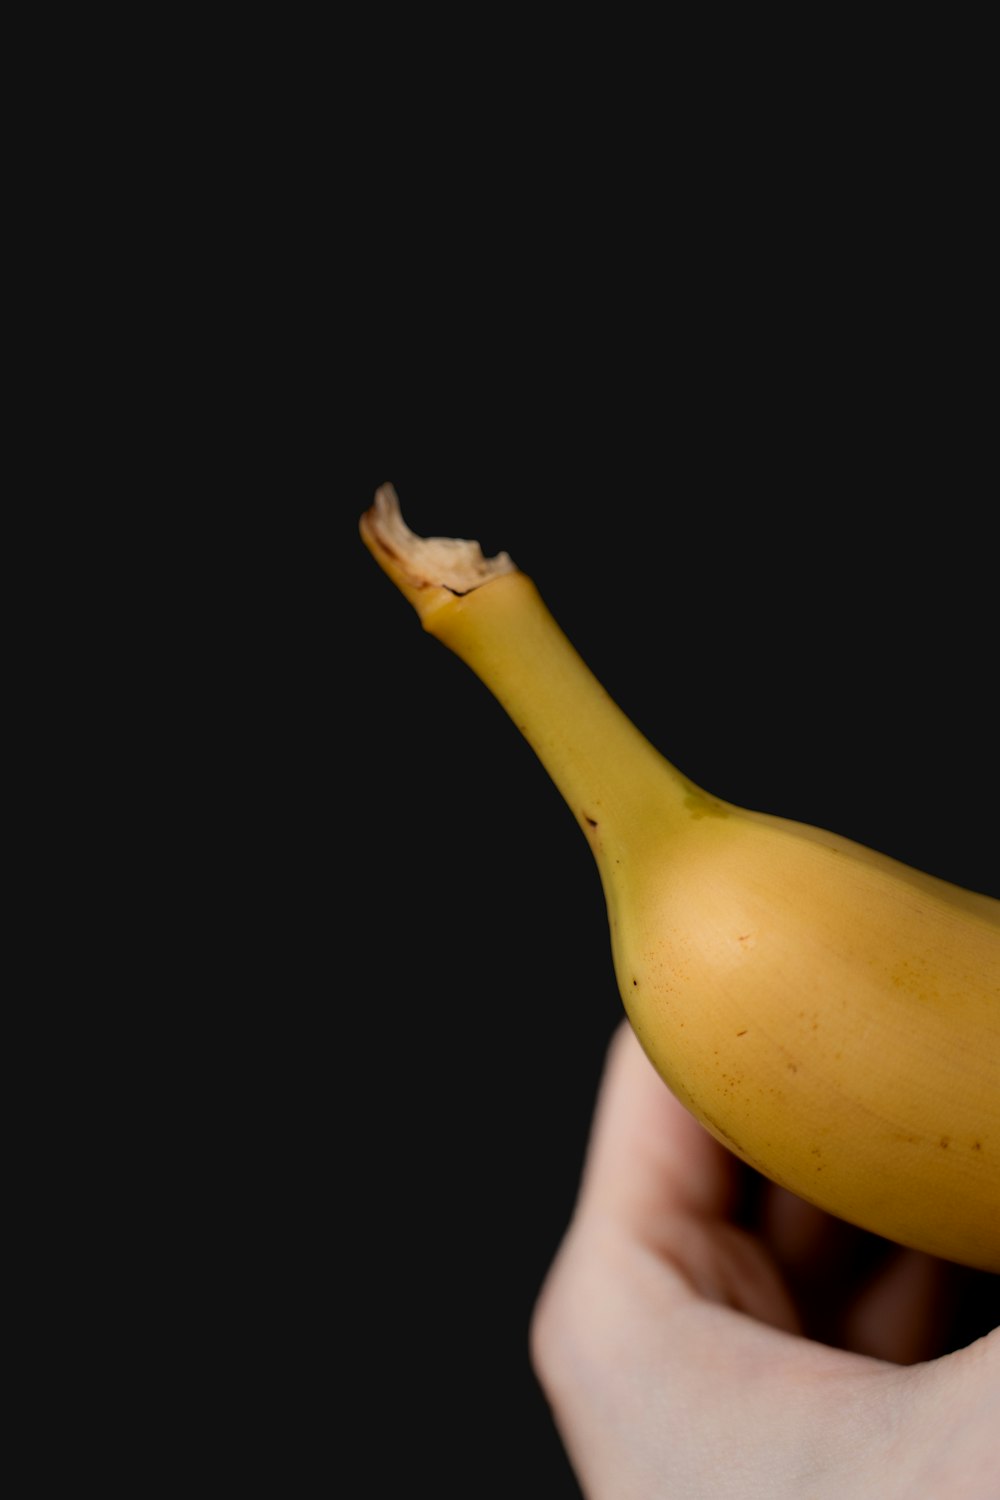 a person holding a banana in their hand